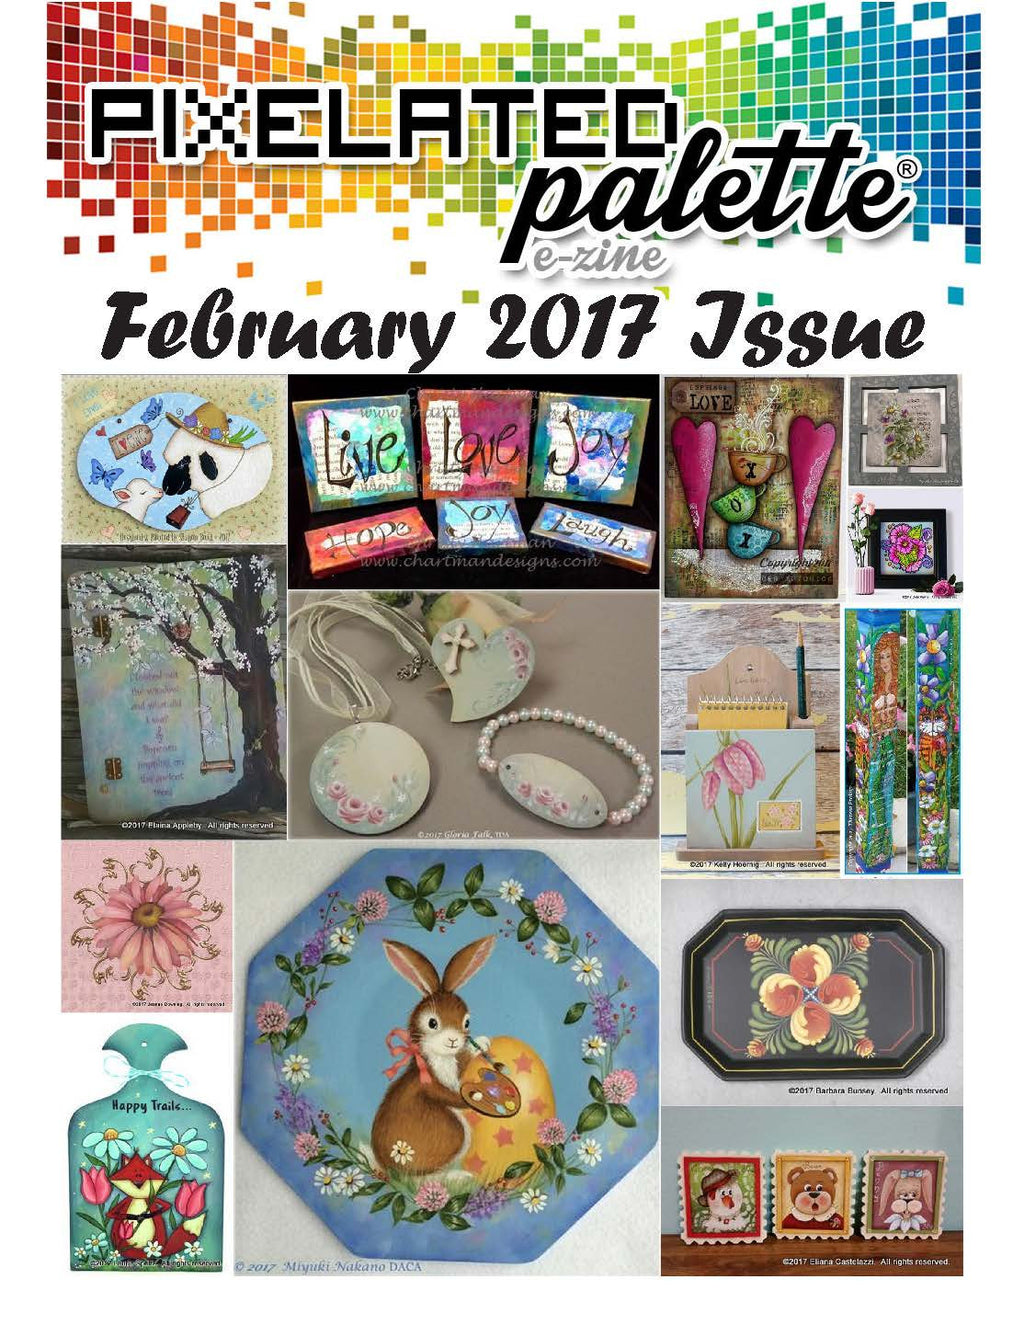 Pixelated Palette - February 2017 Issue Download